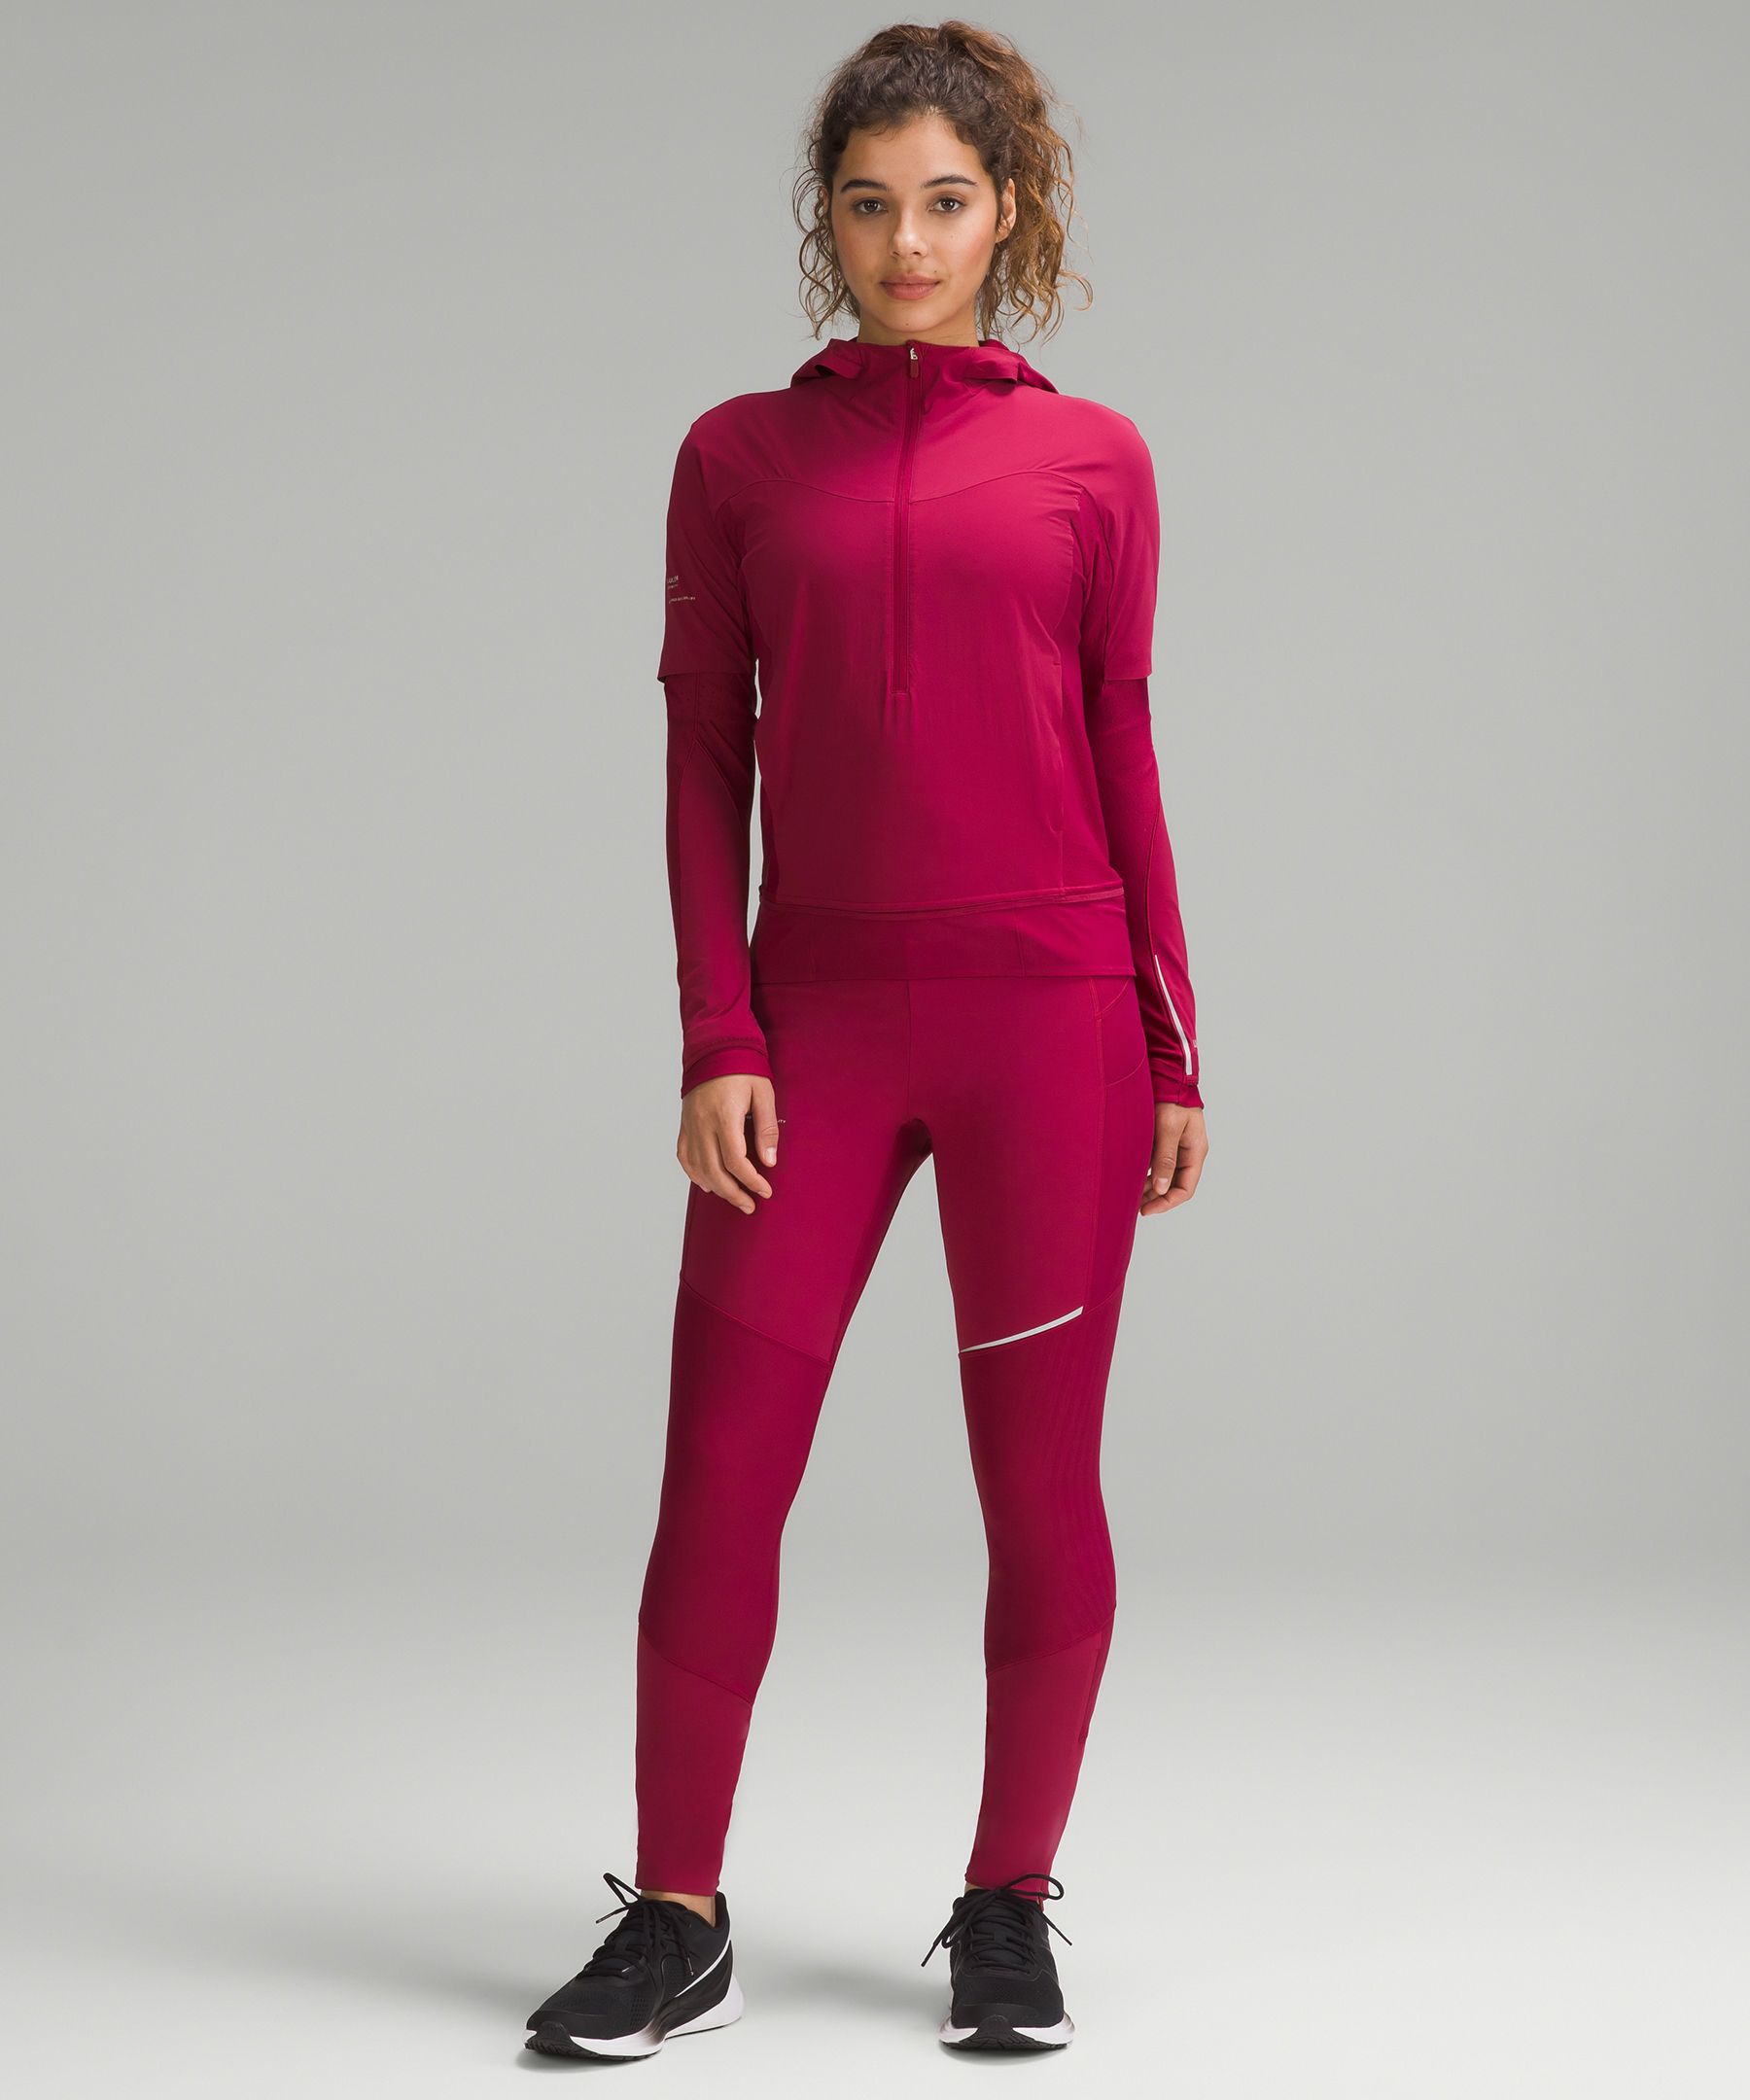 Do Lululemon Tights Work for Skiing? Unwrapping the Facts - Playbite